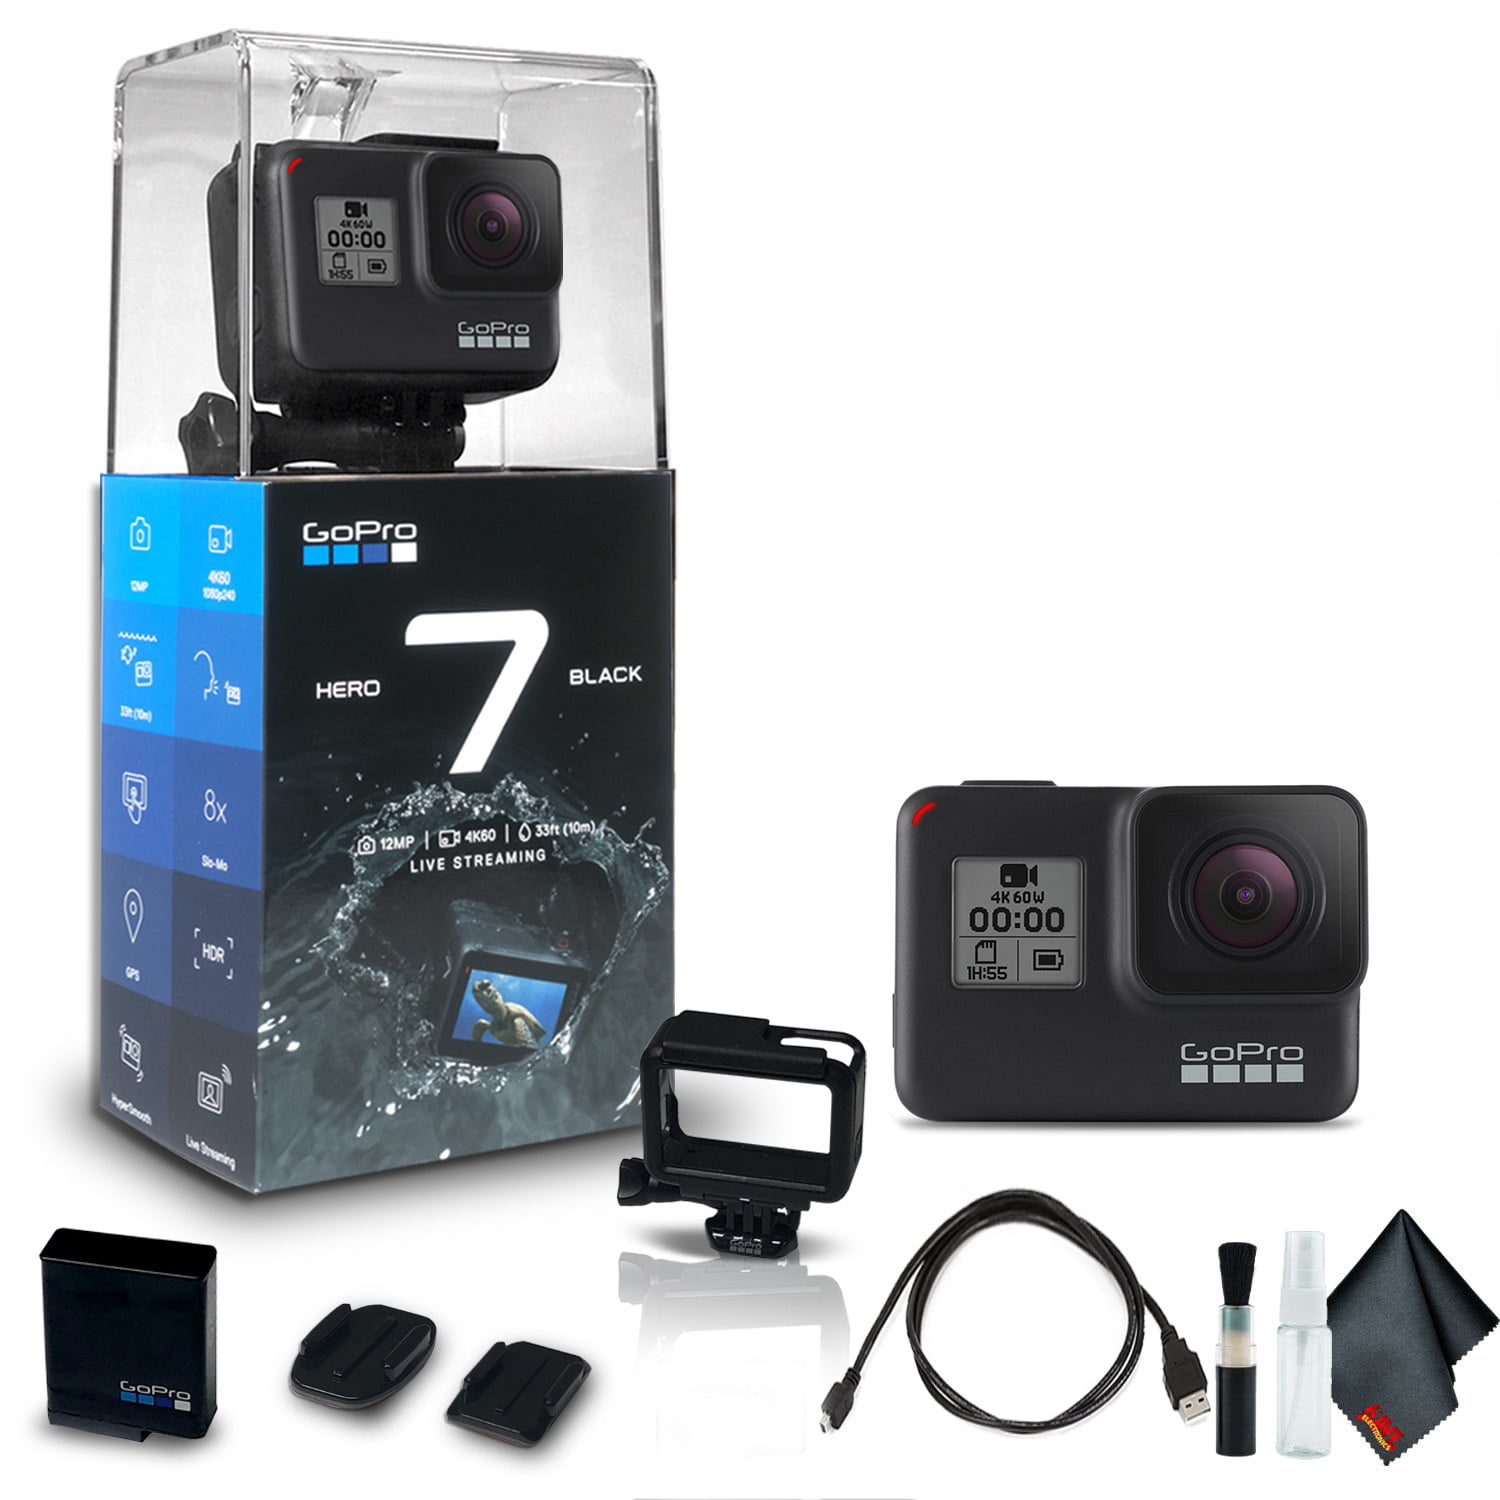 Buy GoPro HERO7 Black - Waterproof Action Camera with Touch Screen, 4K HD  Video, 12MP Photos, Live Streaming and Stabilizati Online in Pakistan.  392096129